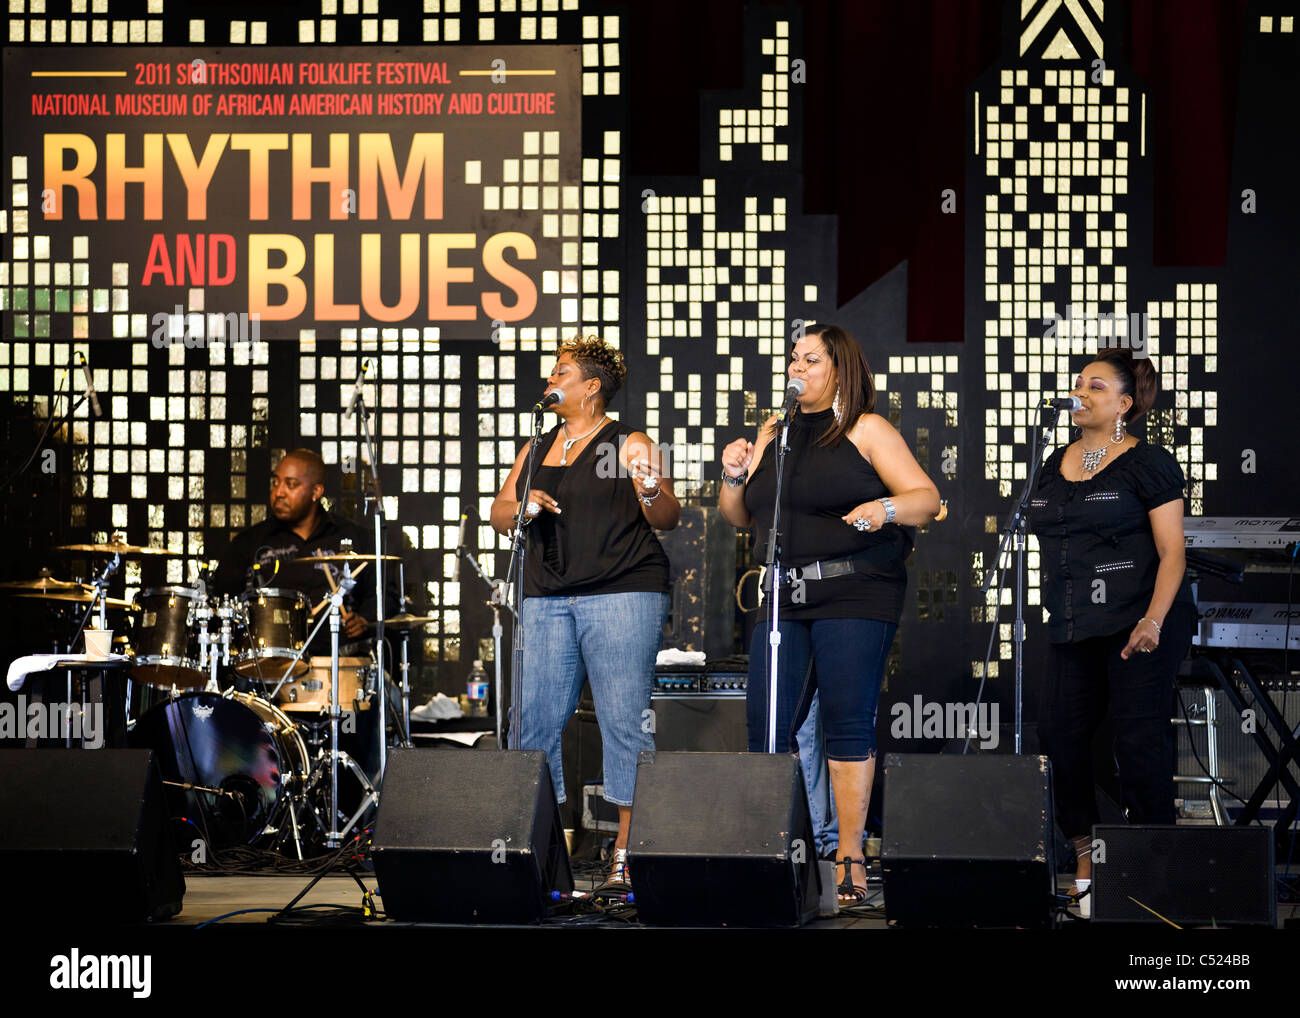 Rhythm and Blues backup singers on stage Stock Photo